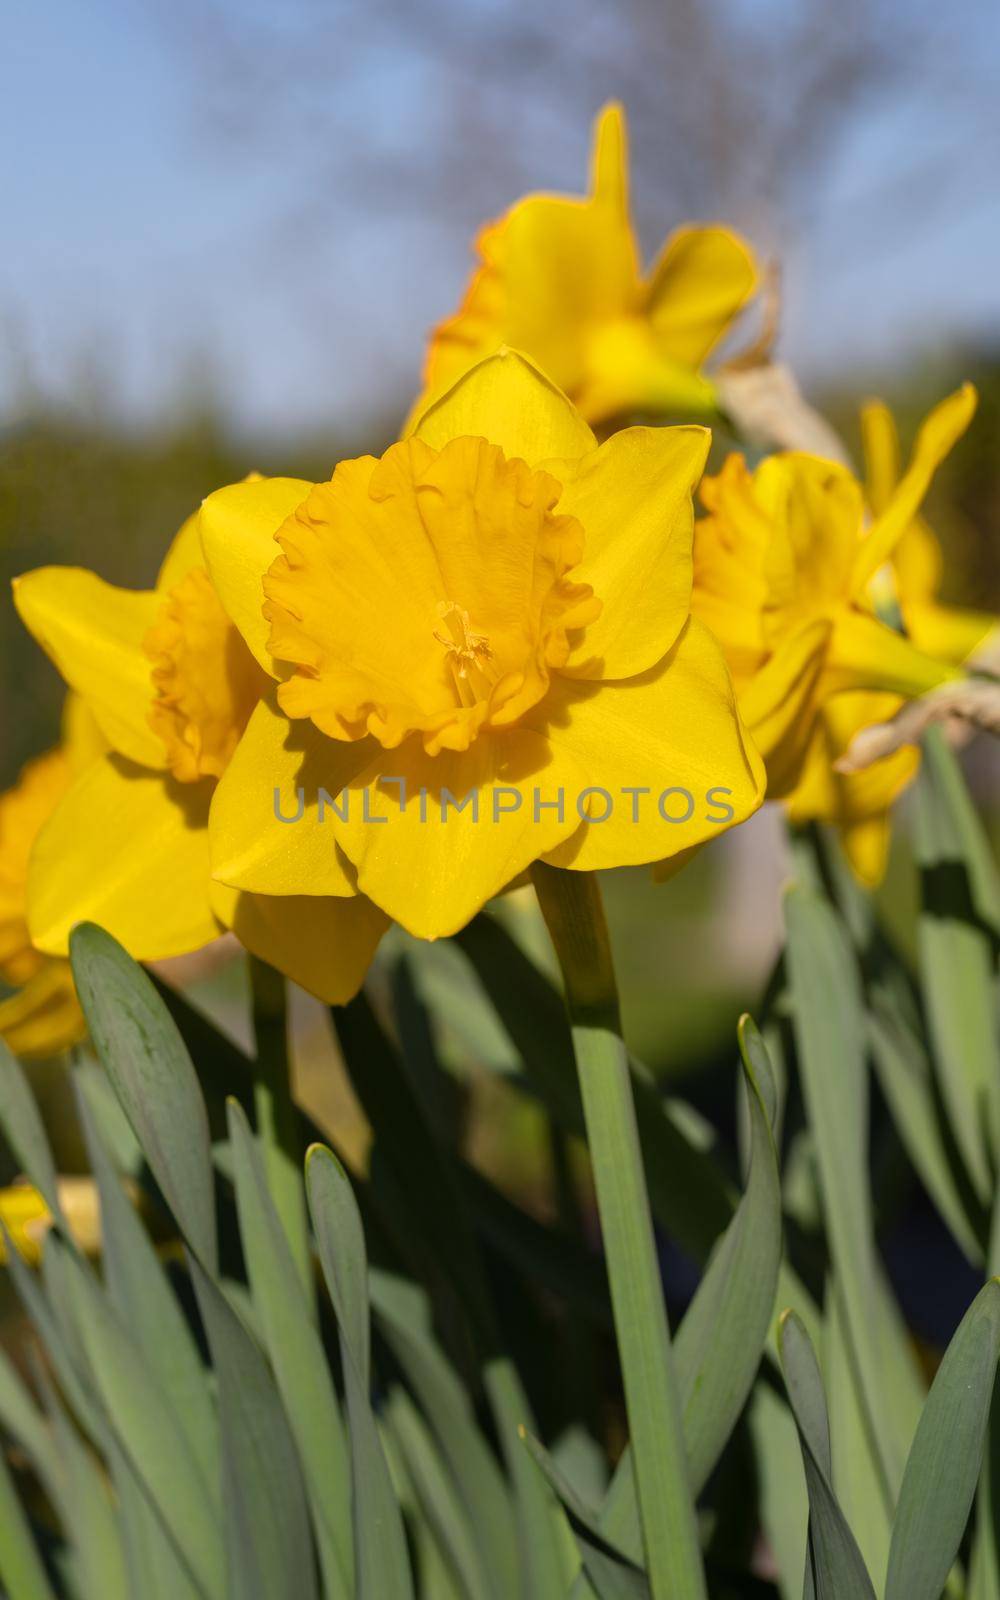 Daffodil (Narcissus pseudonarcissus), flowers of springtime